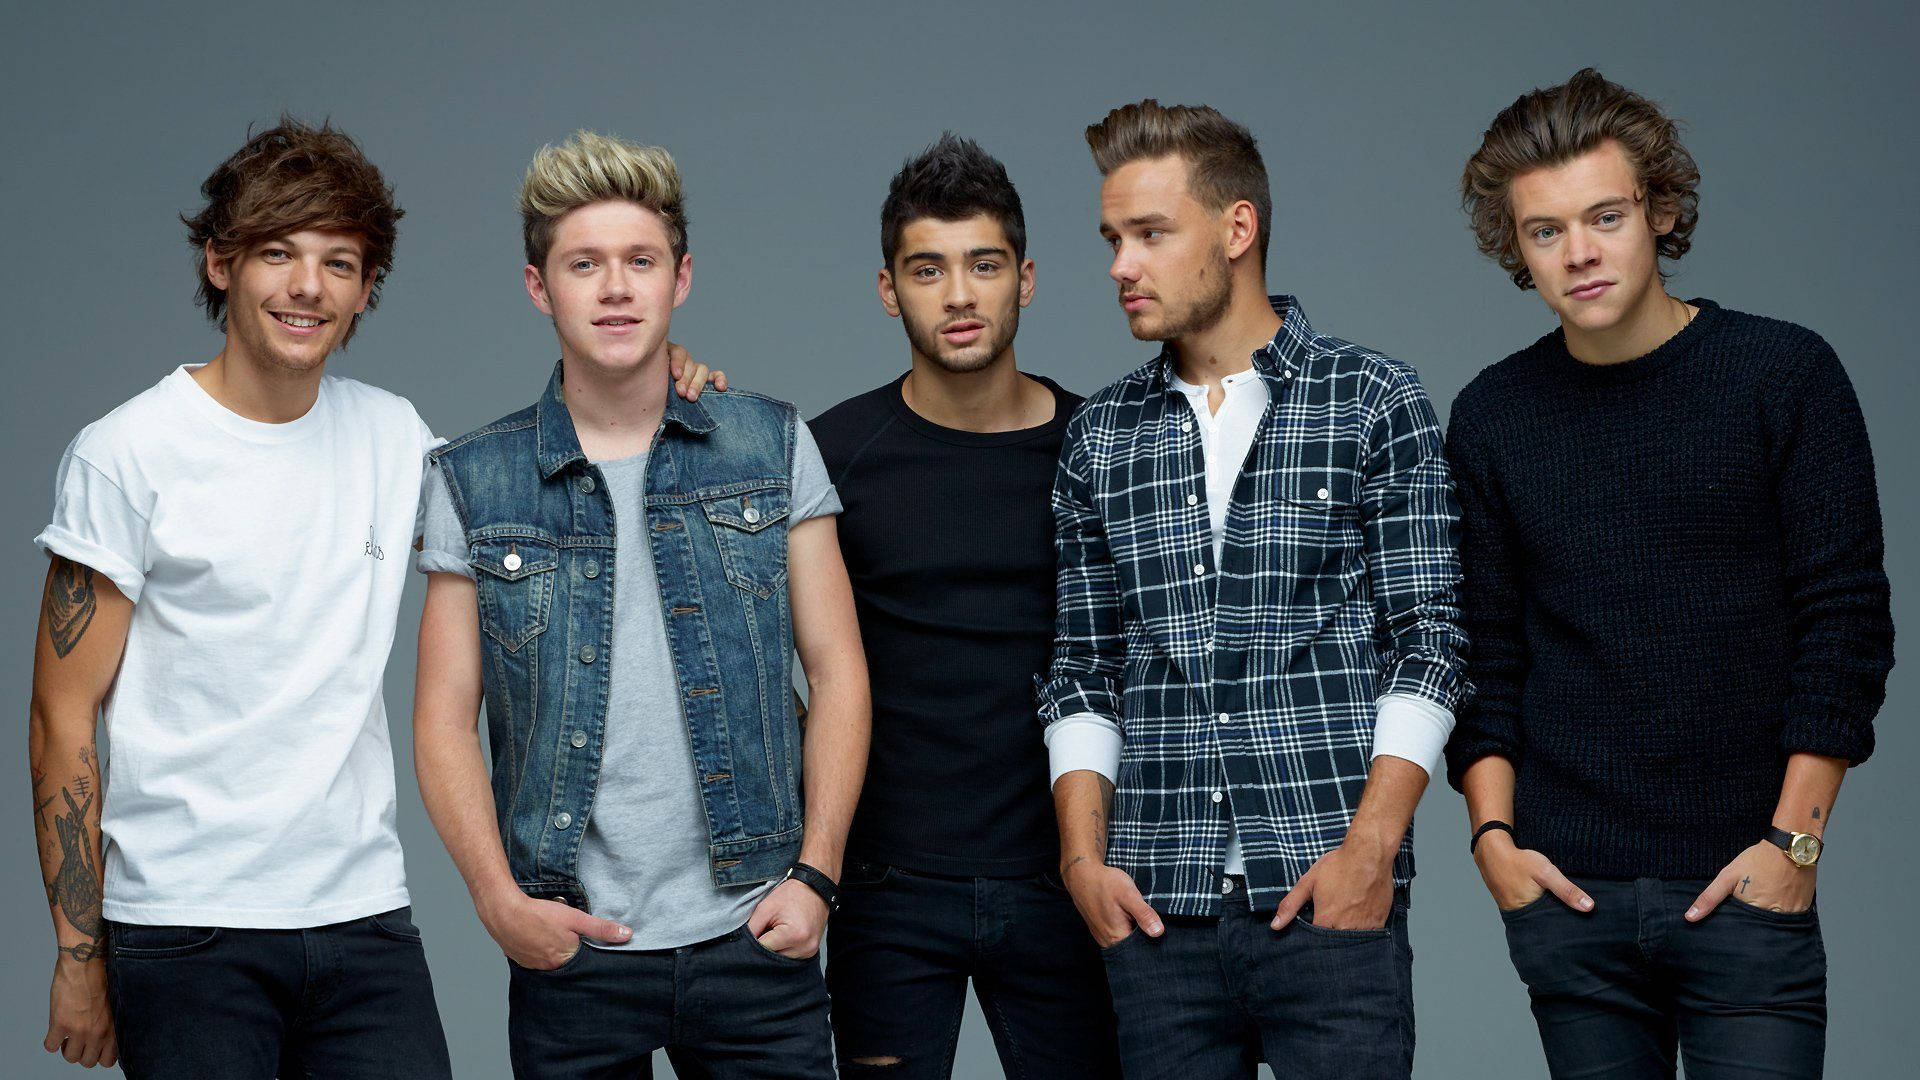 Good-looking One Direction